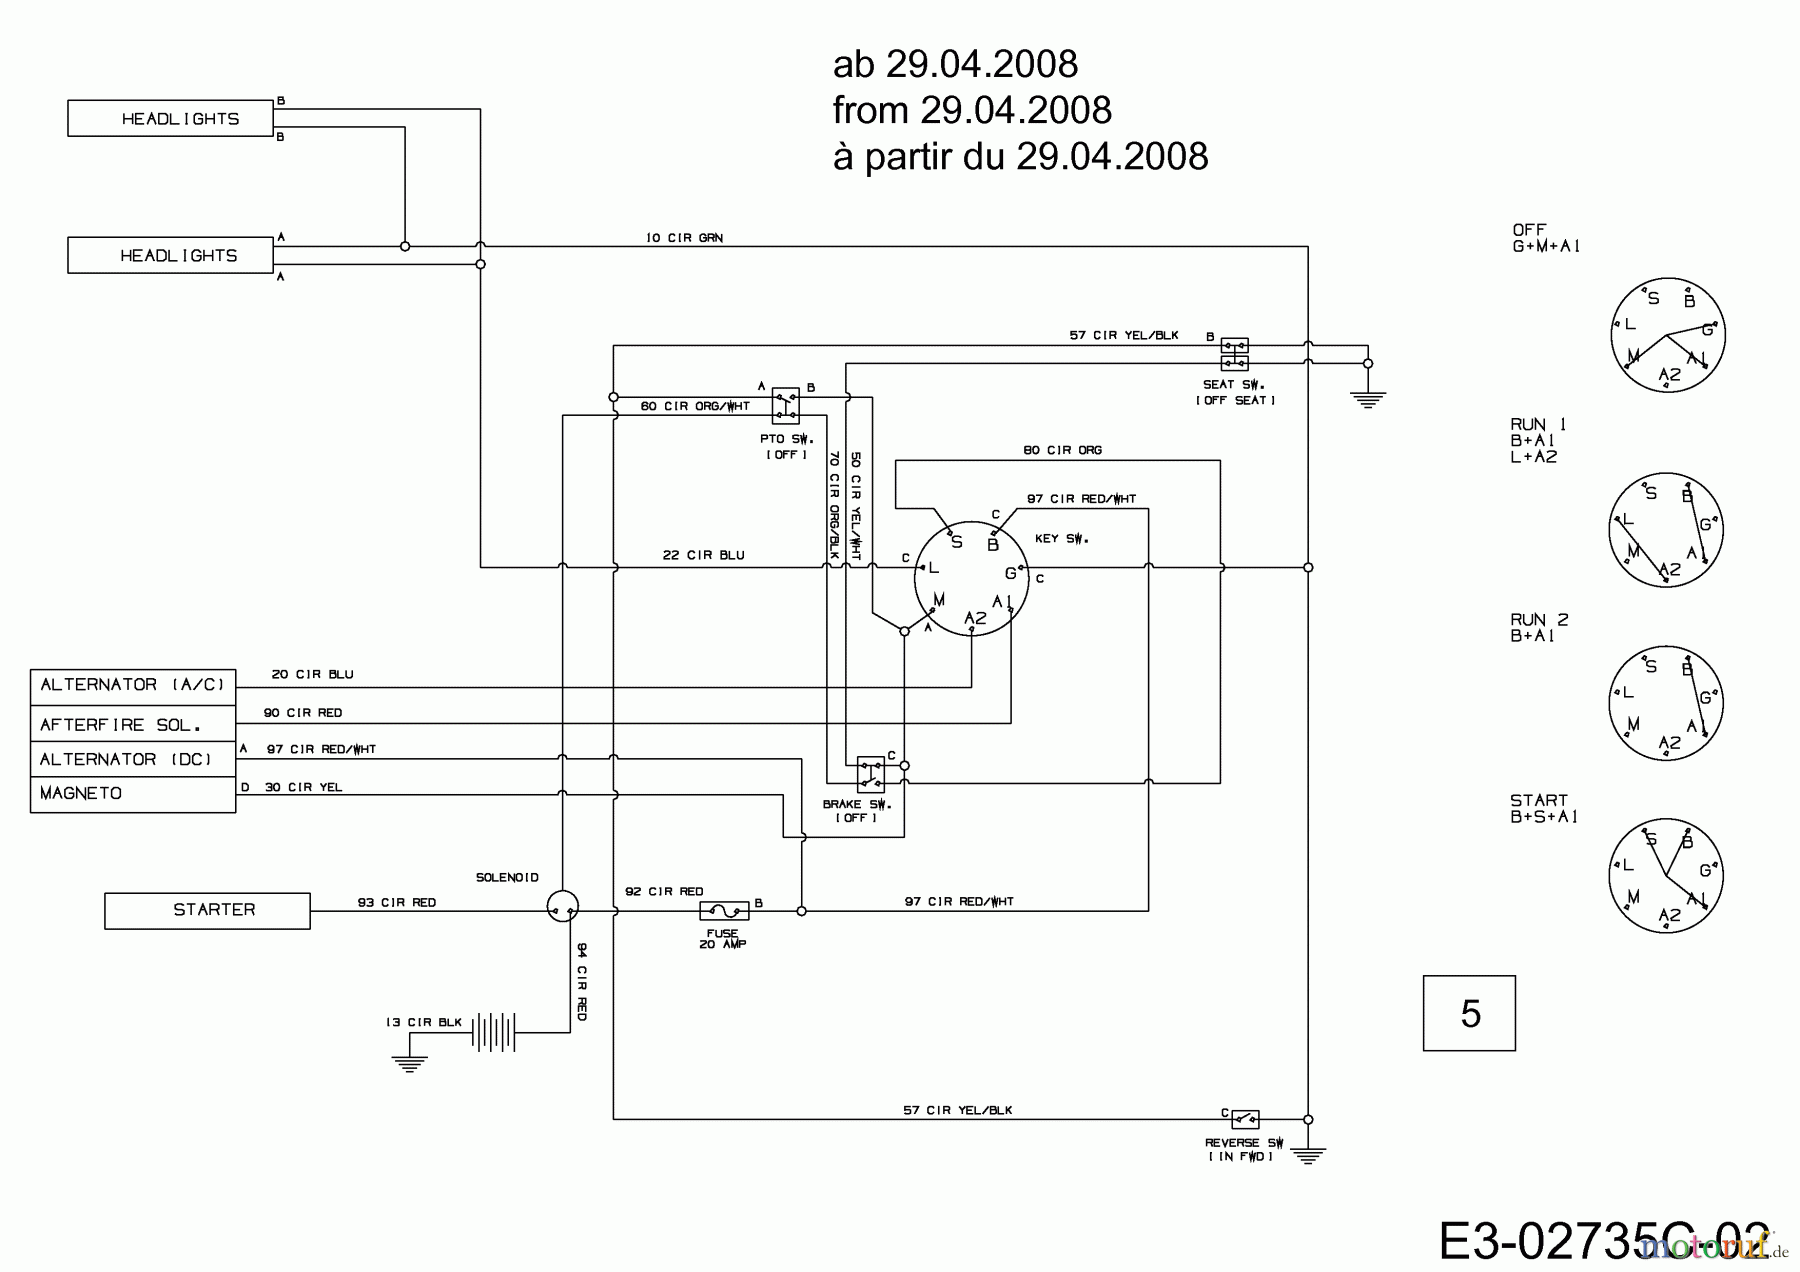  Hagro Lawn tractors RS 155/96 H 13AM798F607  (2009) Wiring diagram from 29.04.2008